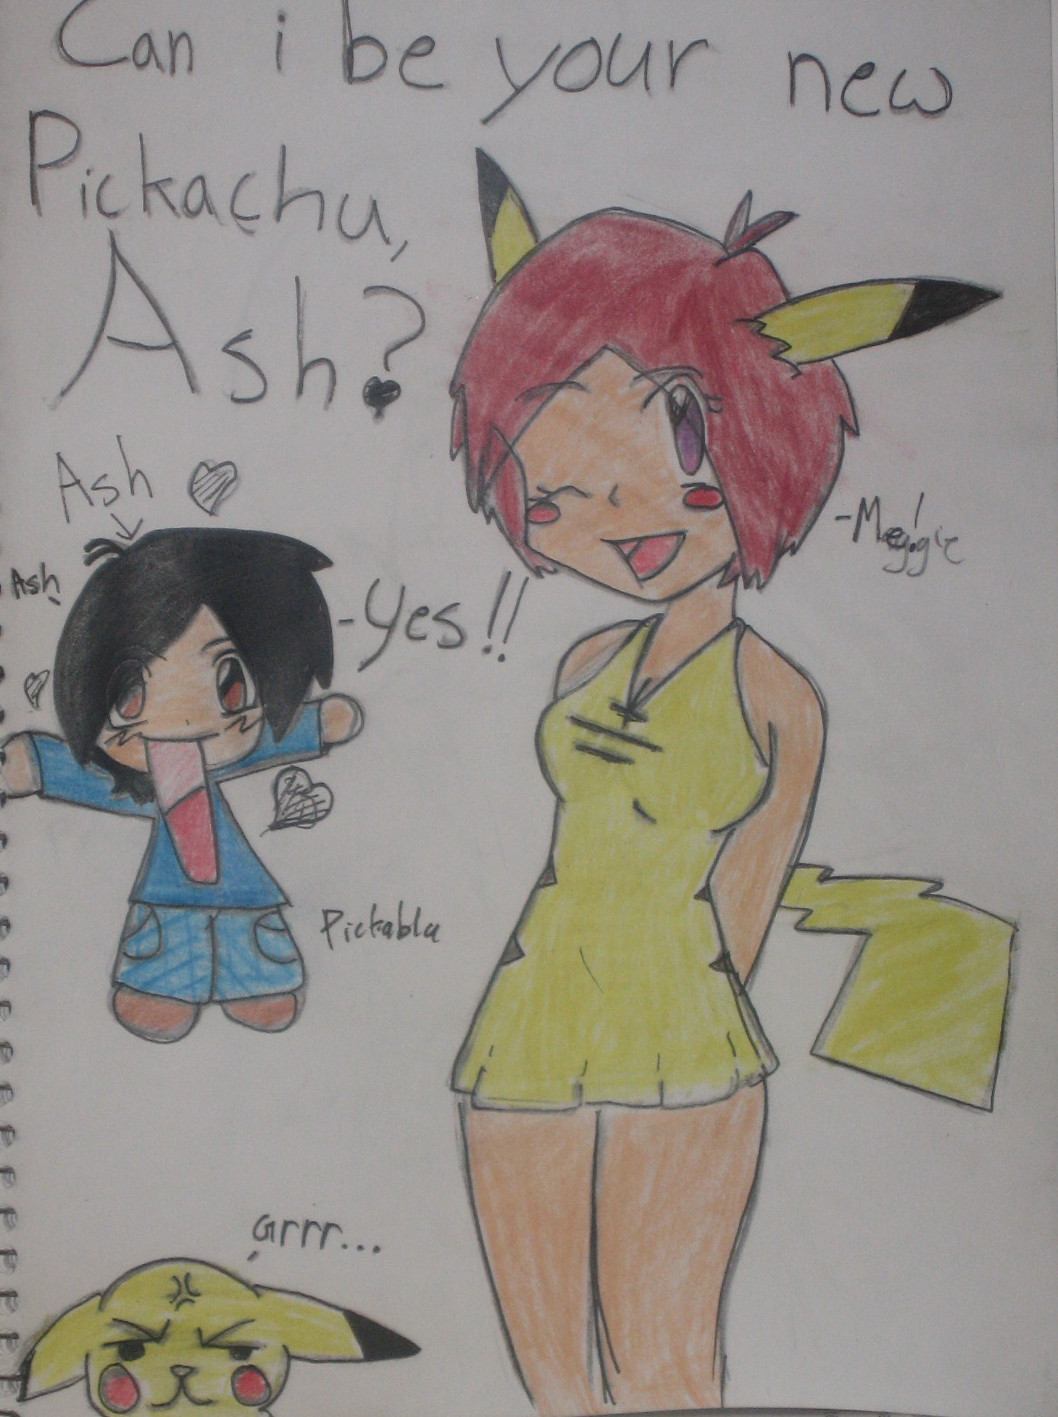 Can i be your new Pickachu, Ash?(Comment!) by PickaBlu